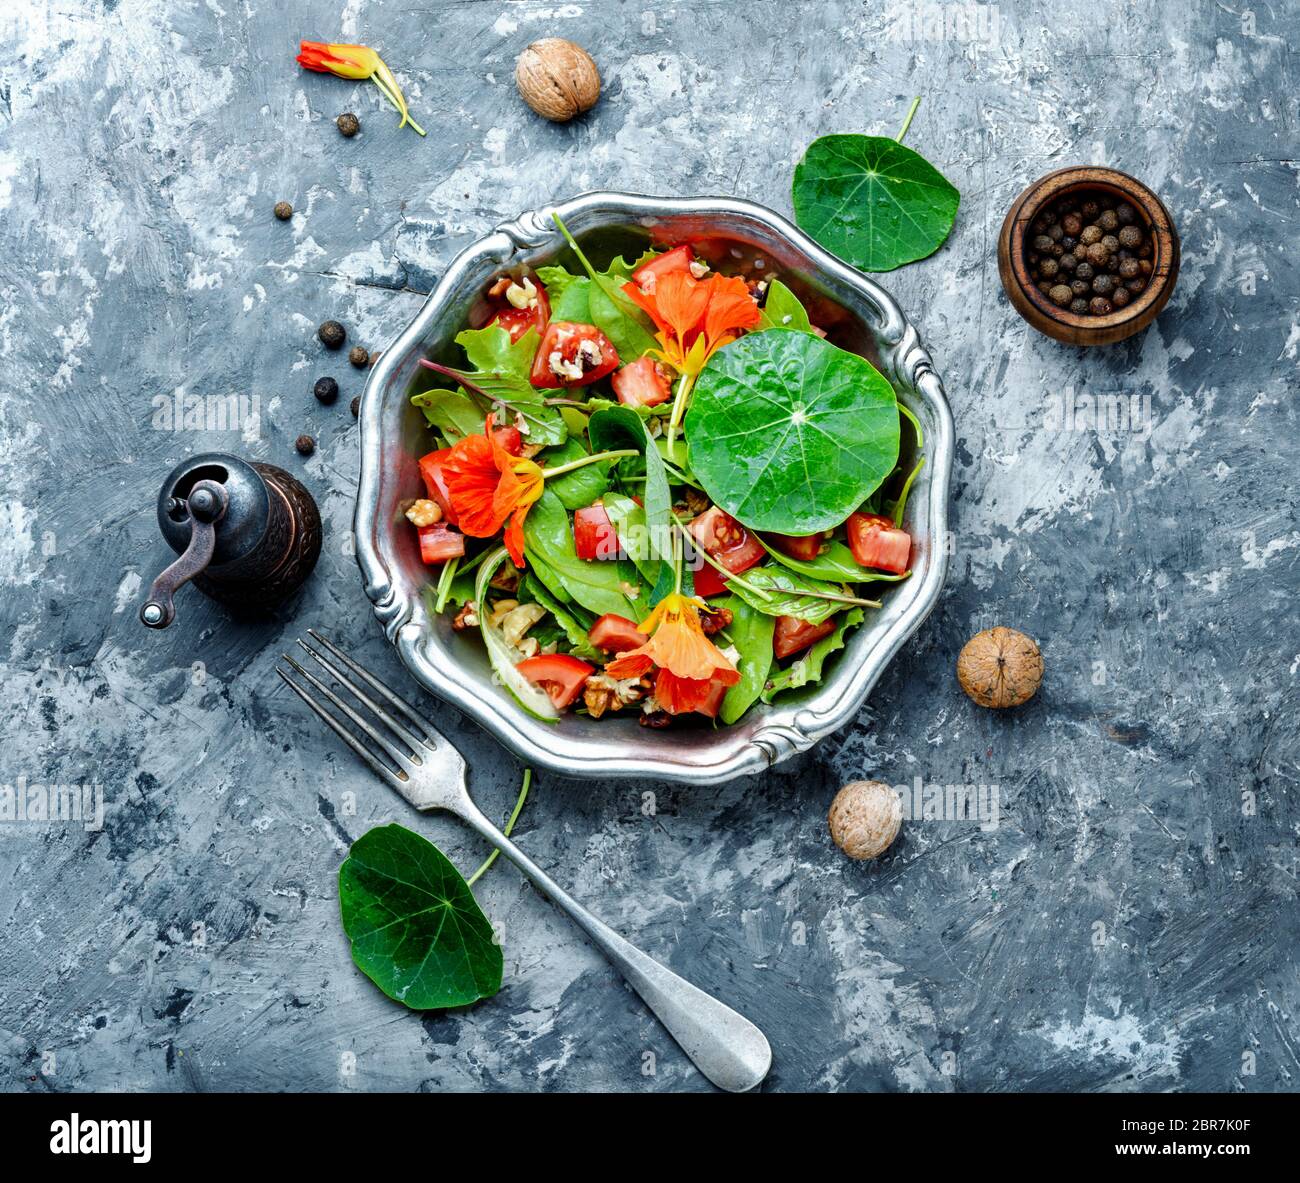 Healthy salad with flowers, nasturtium leaves, tomatoes and nuts. Summer food. Stock Photo